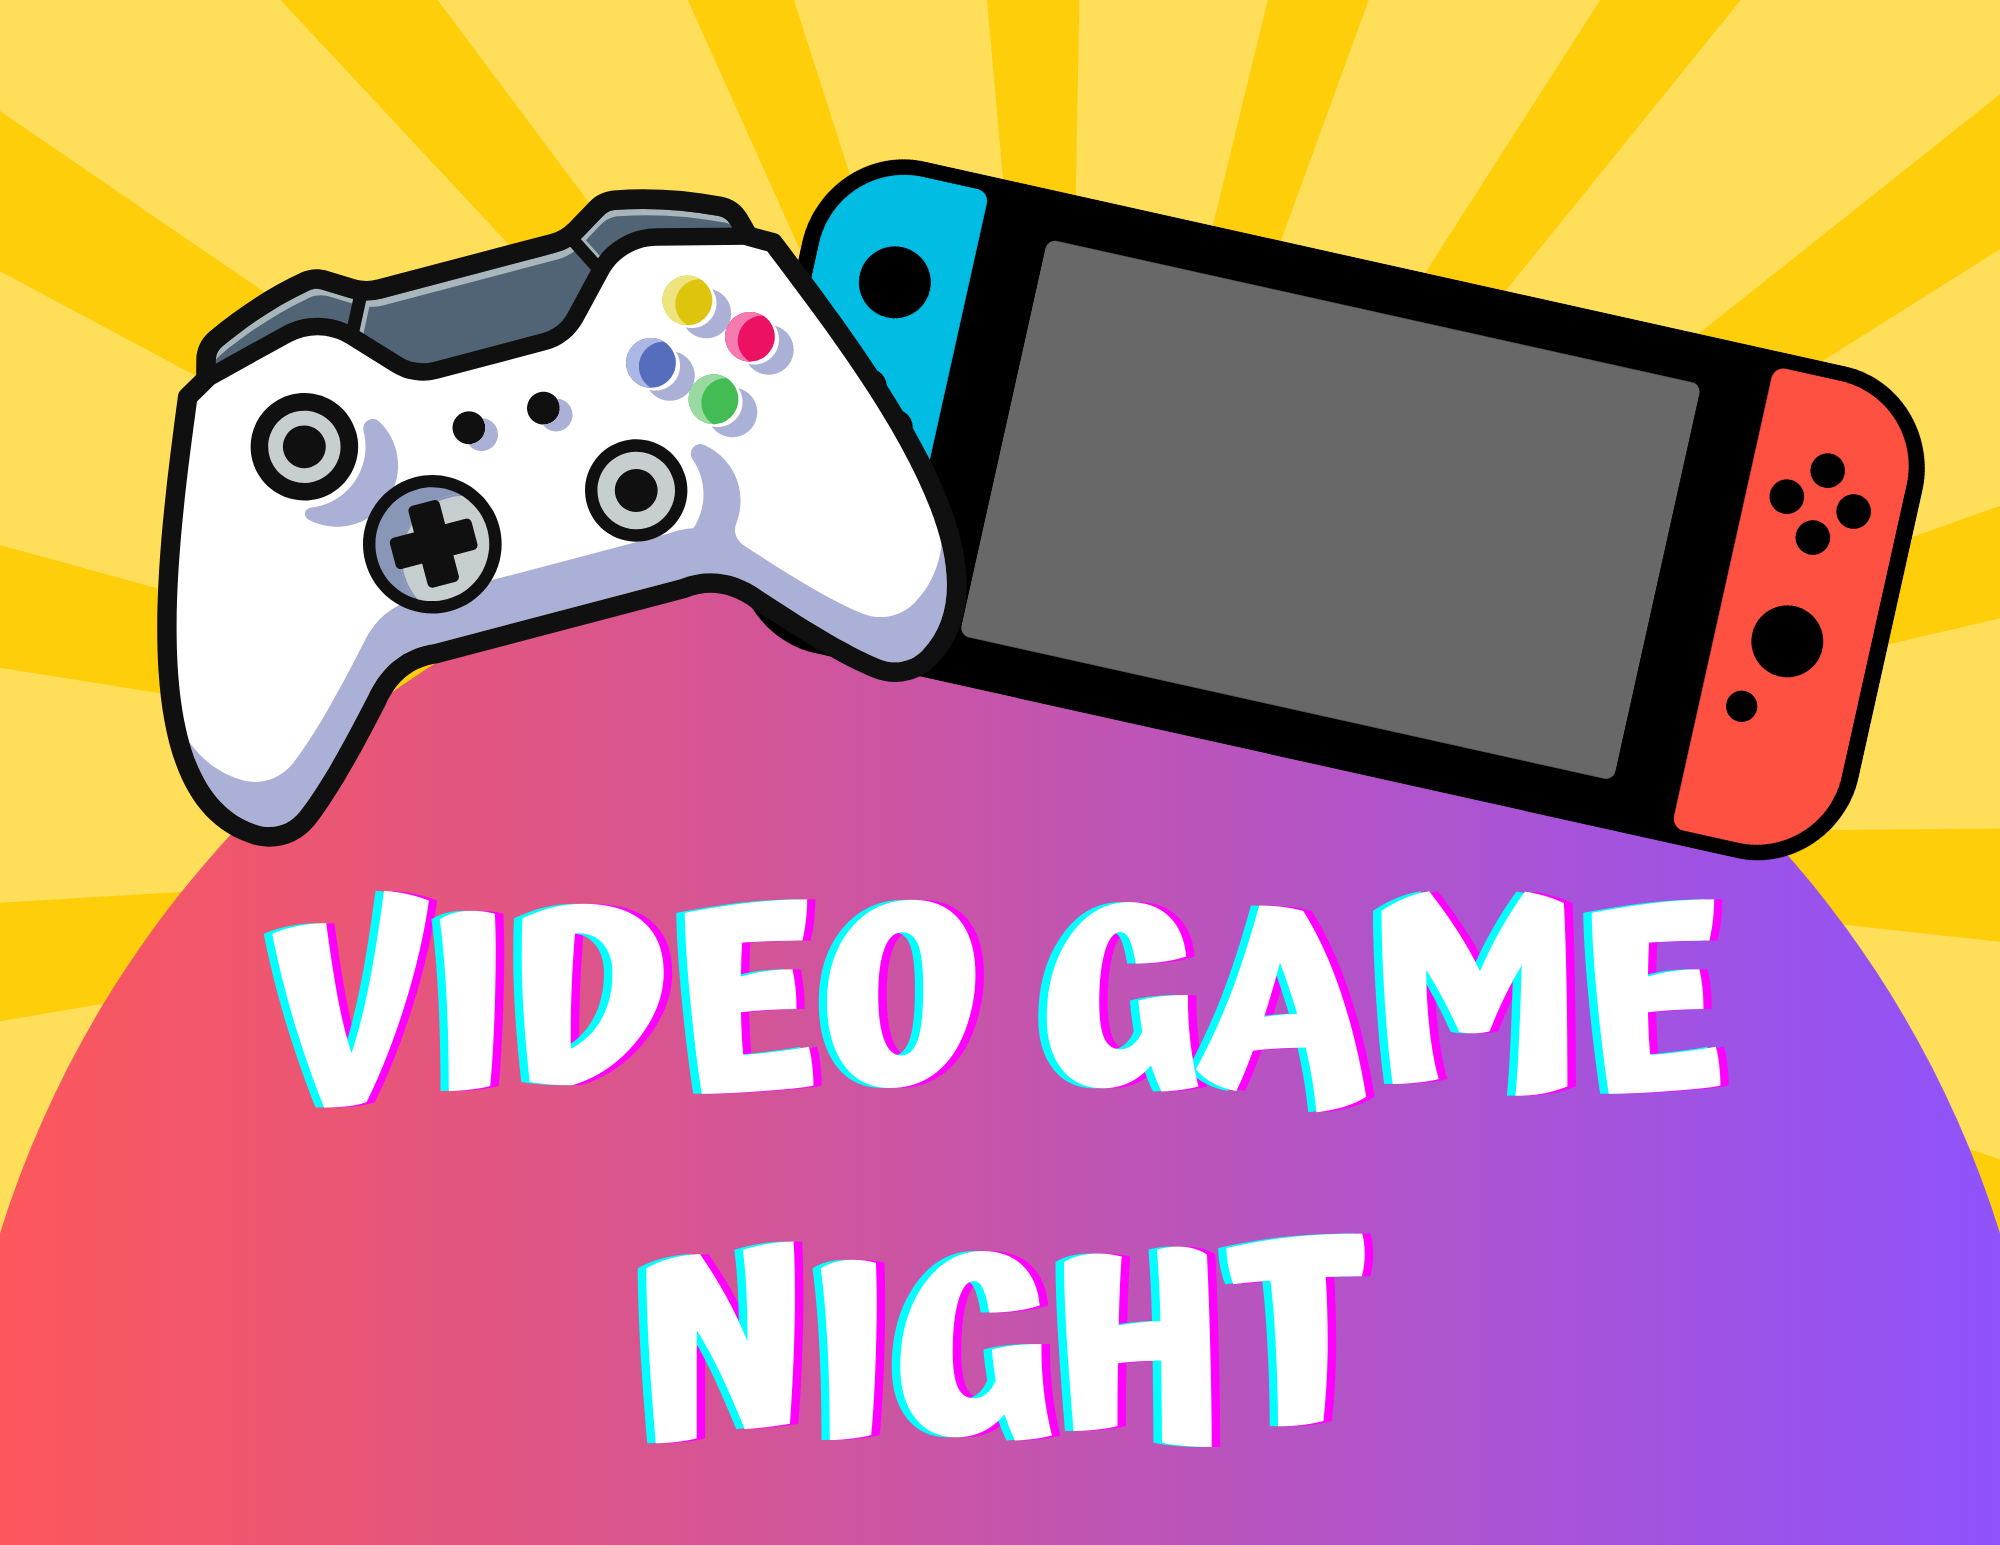 graphic of an xbox one controller and a nintendo switch hovering over the words "Video Game Night"